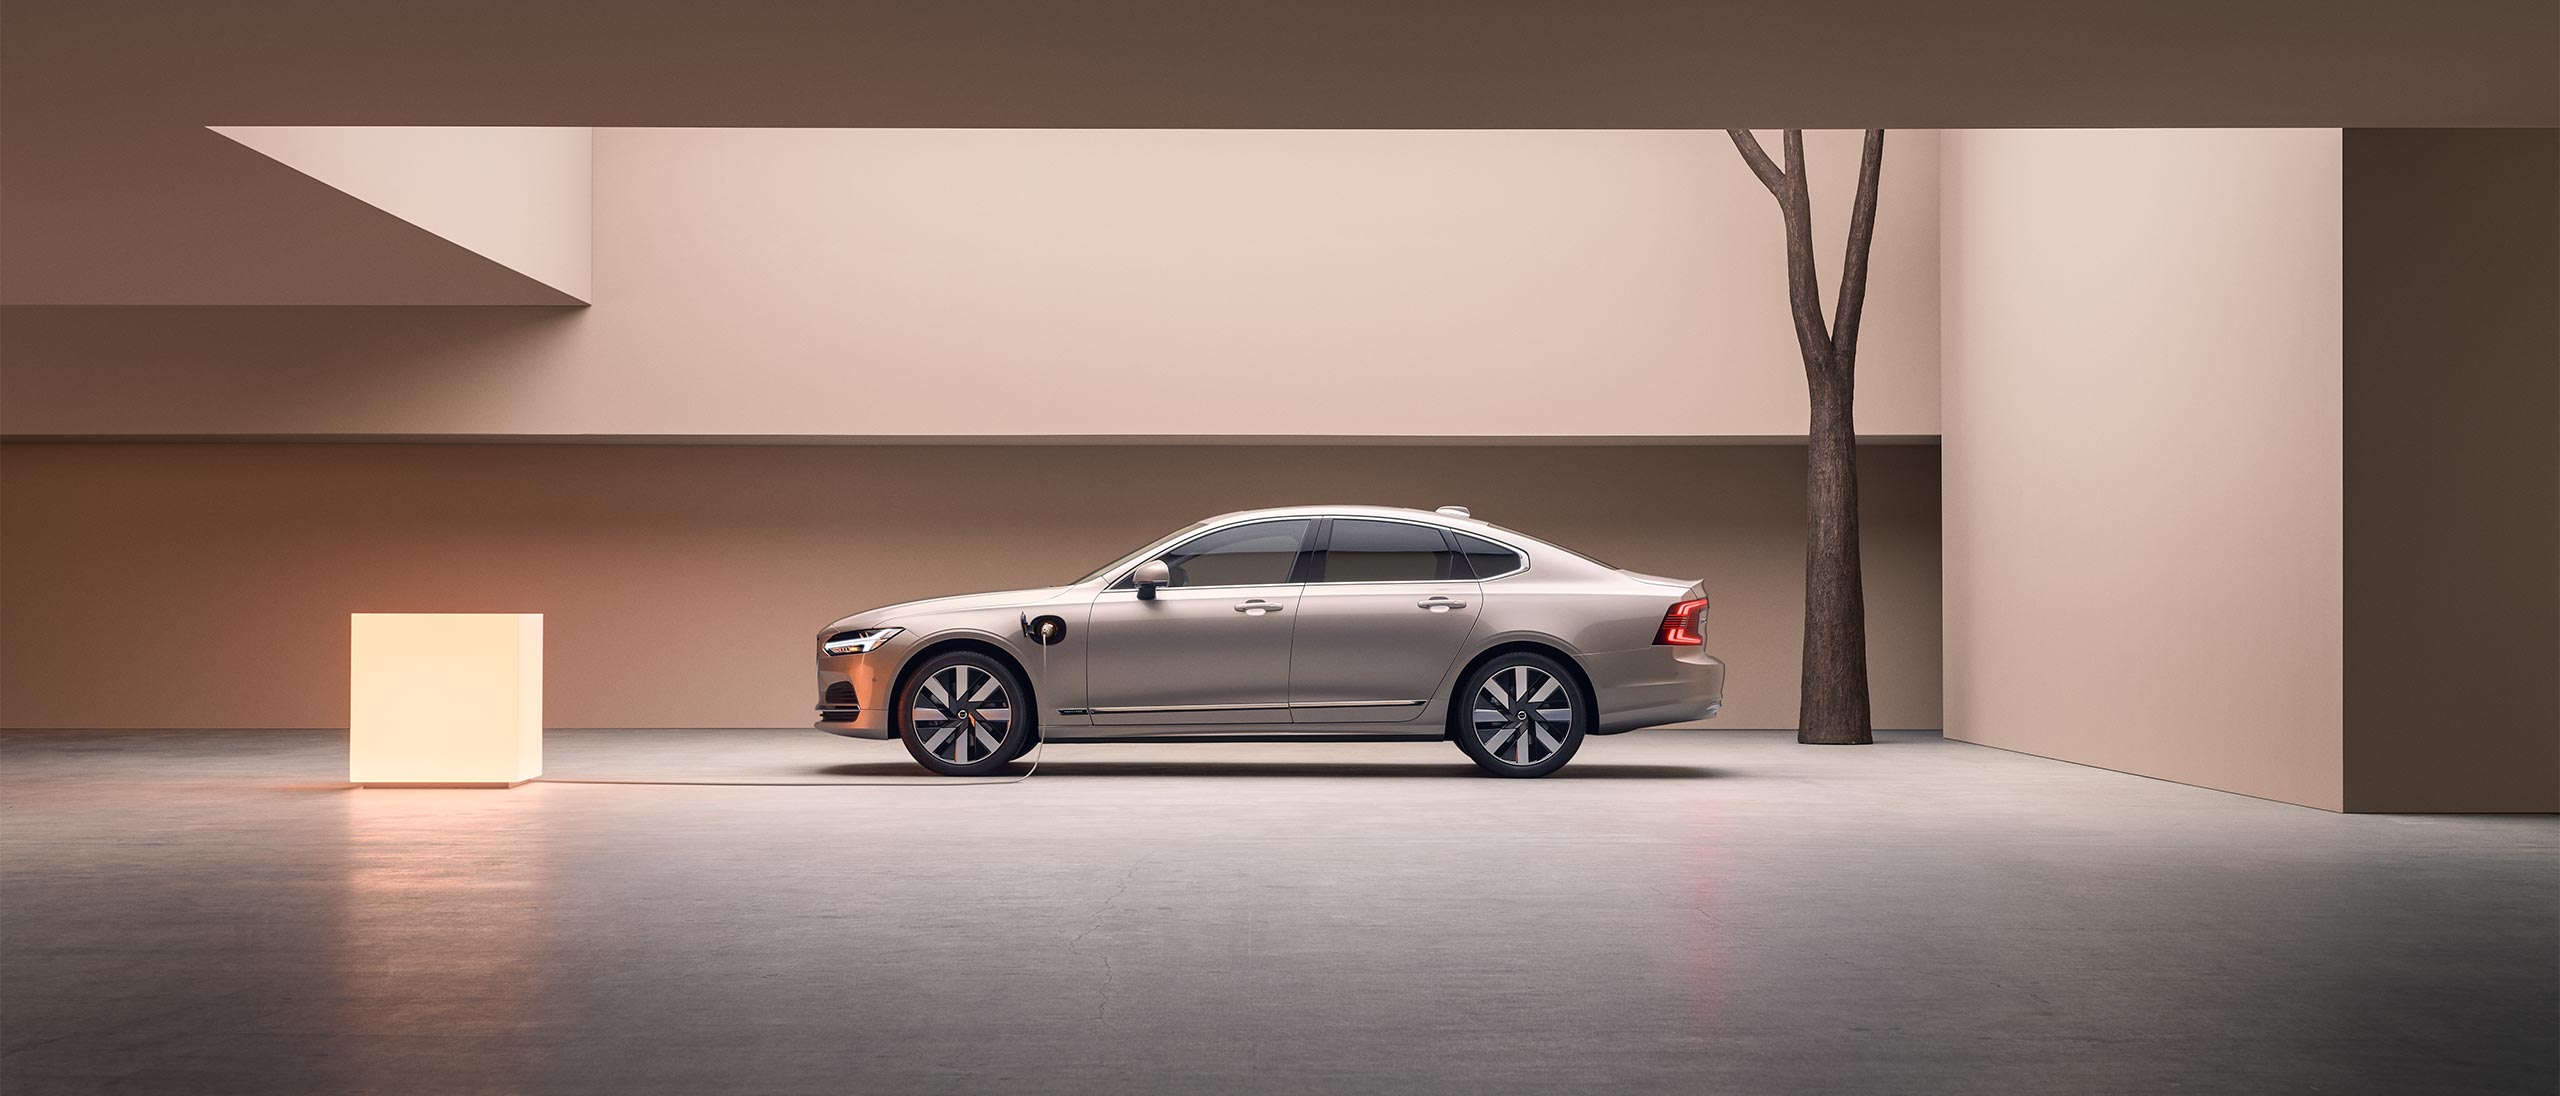 A wide-angle image of the left side of a Volvo S90 Plug-in hybrid parked in a large concrete structure.